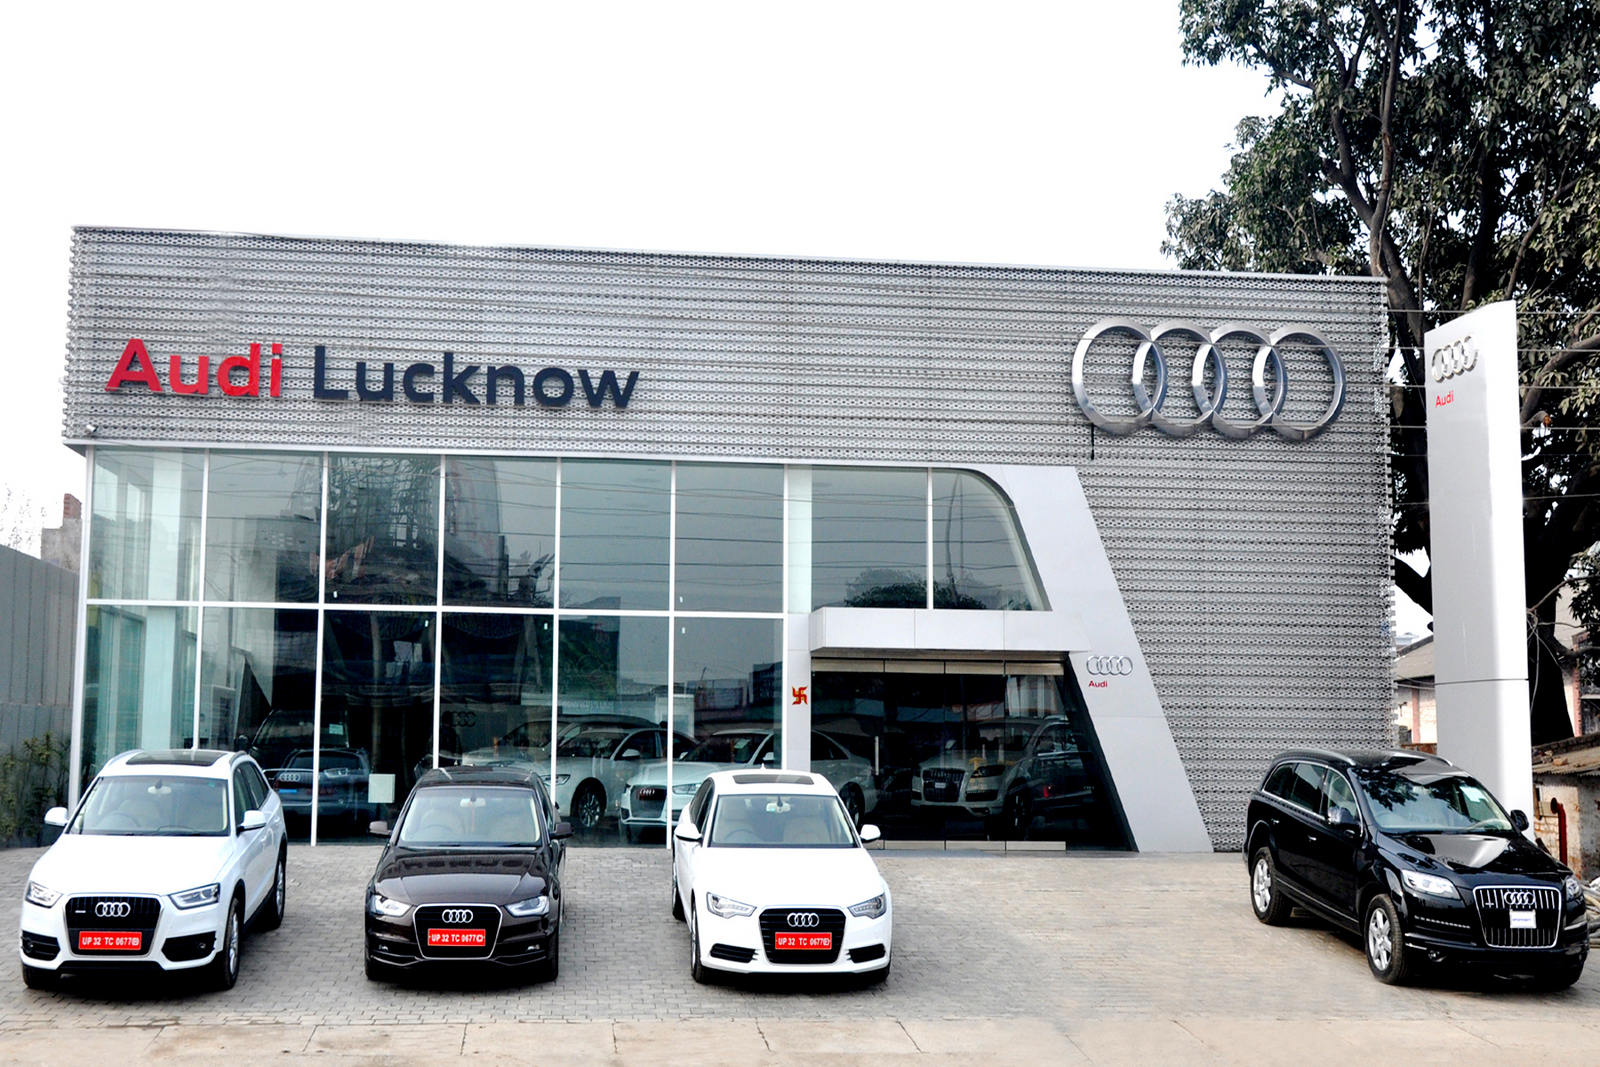 Mobile showrooms open by Audi for smaller cities!